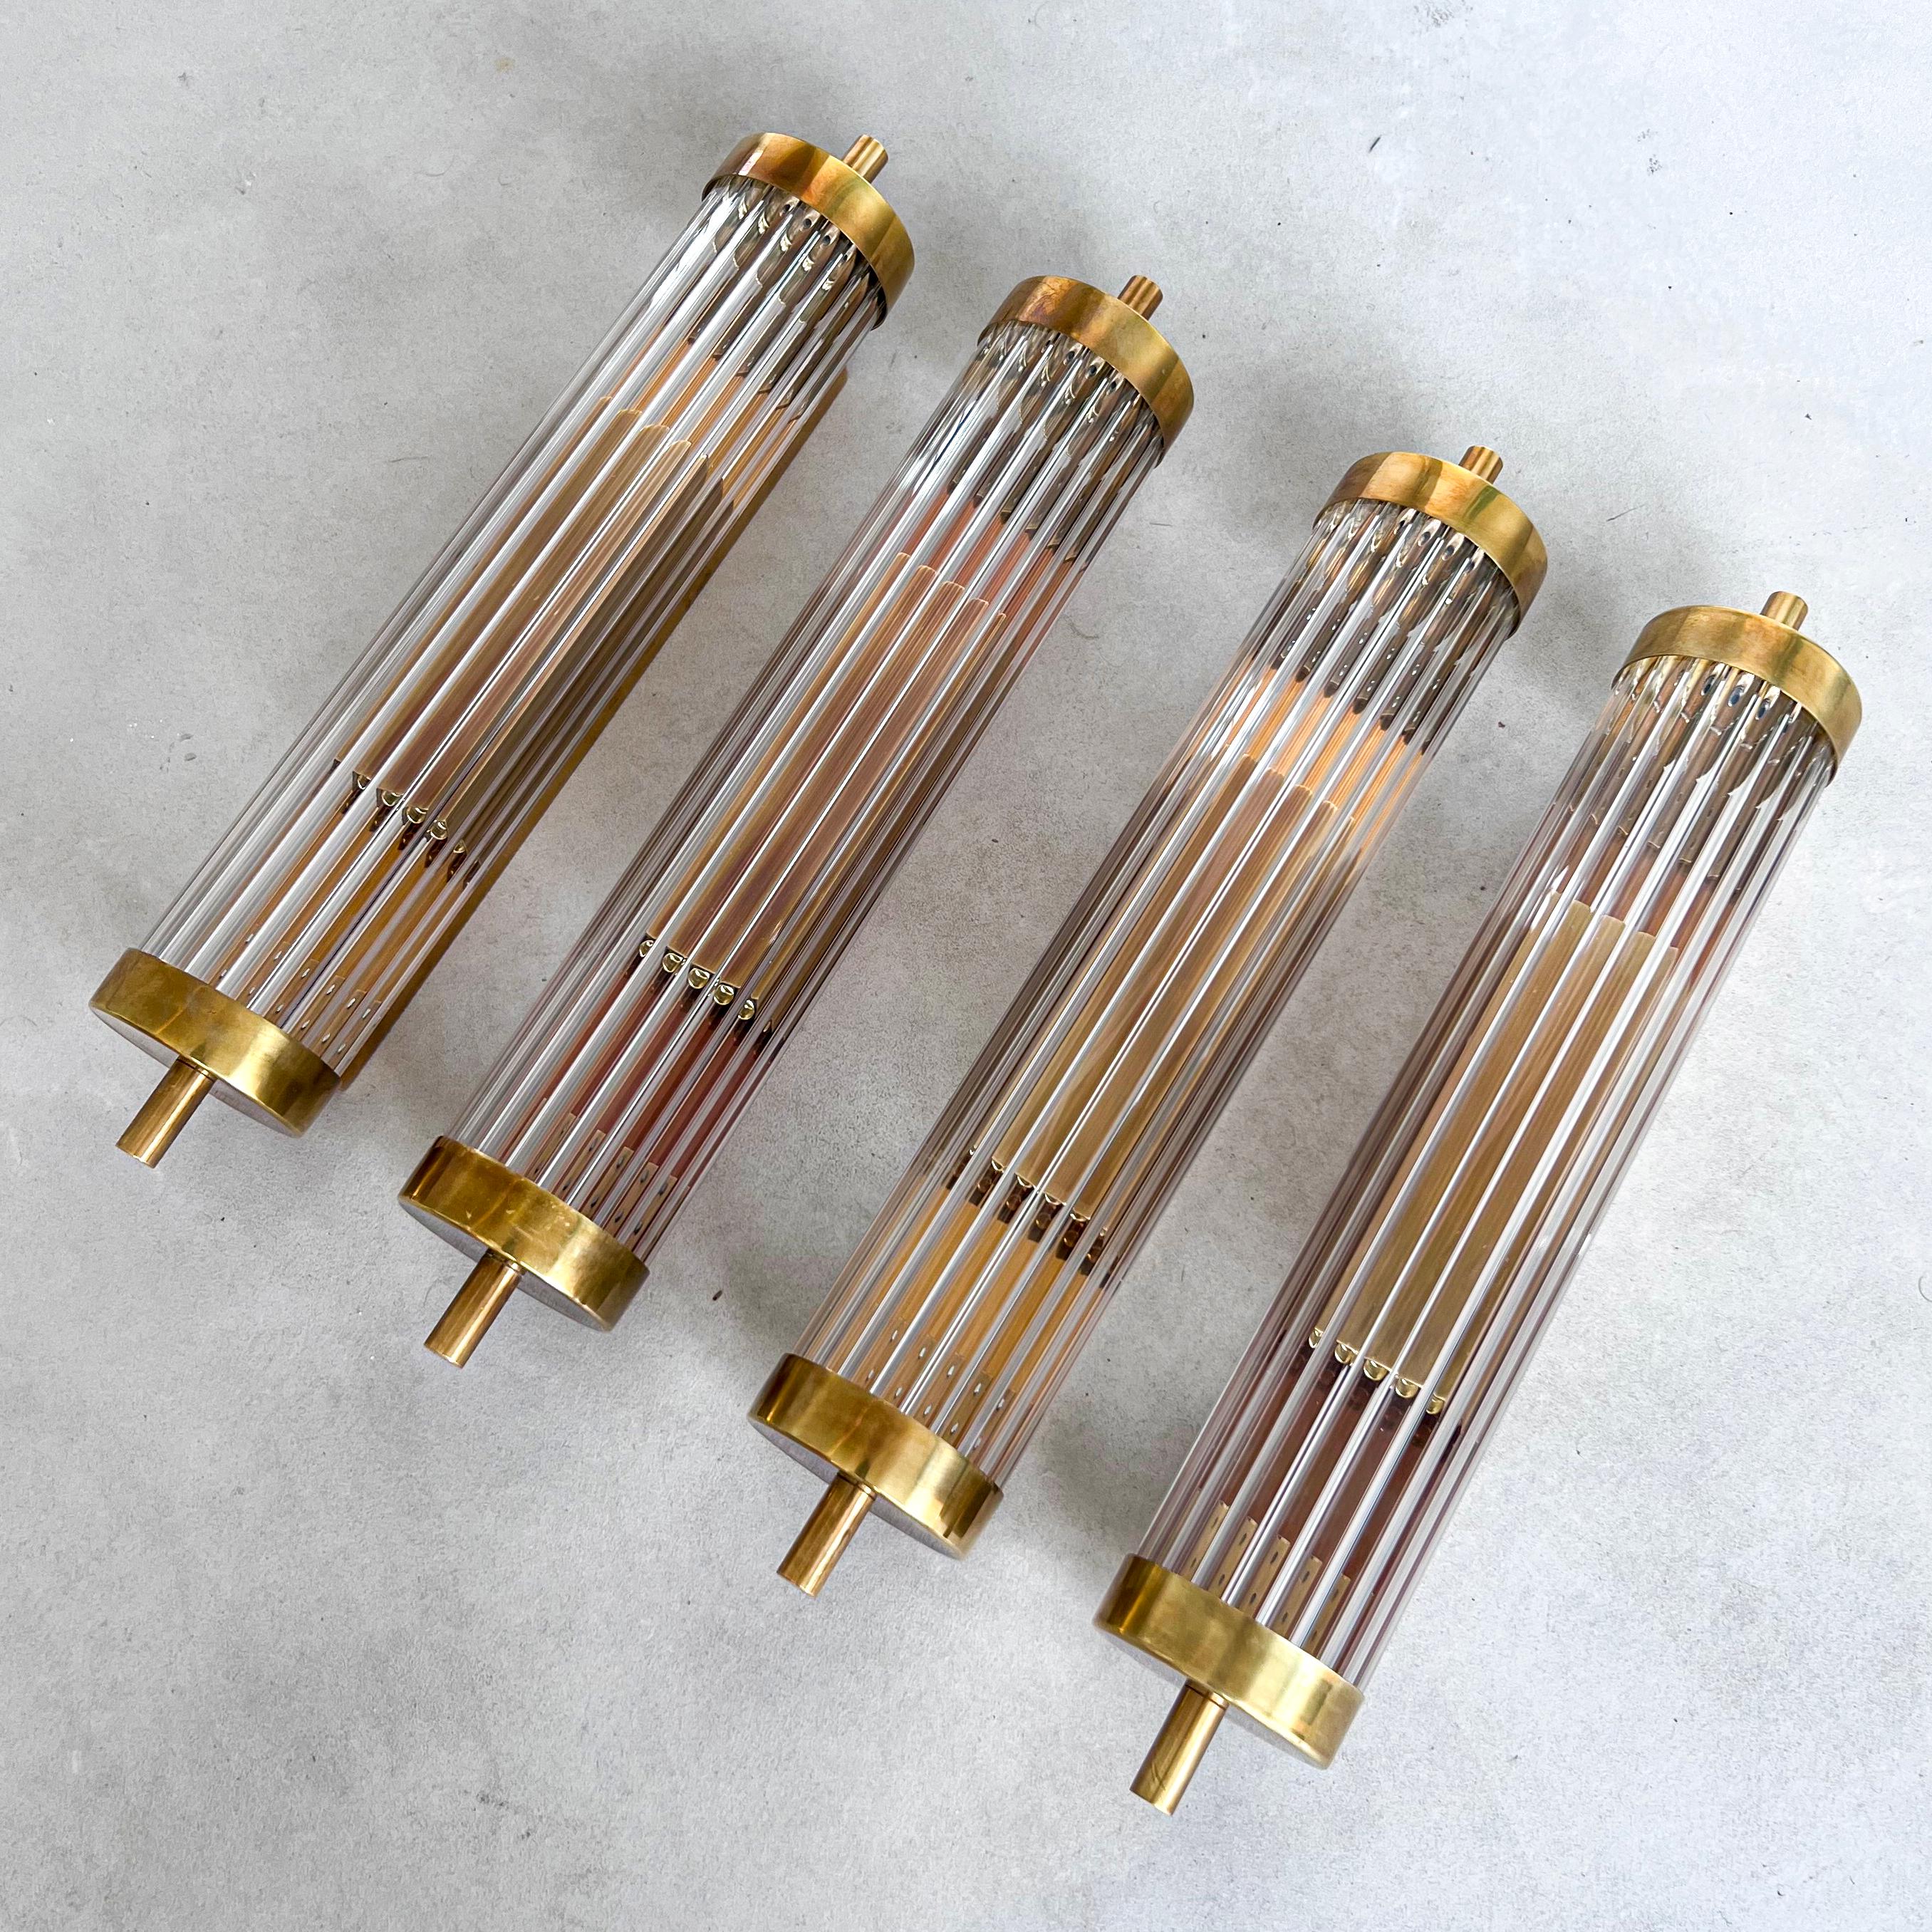 Wall lamps Applique for Vanity or Wall Sconces - Modern Mid Century Italian Lighting 

Offered for sale is a set of four stunning contemporary wall lights, designed and hand crafted in Milano, Italy by expert artisans using brass and fluted glass.